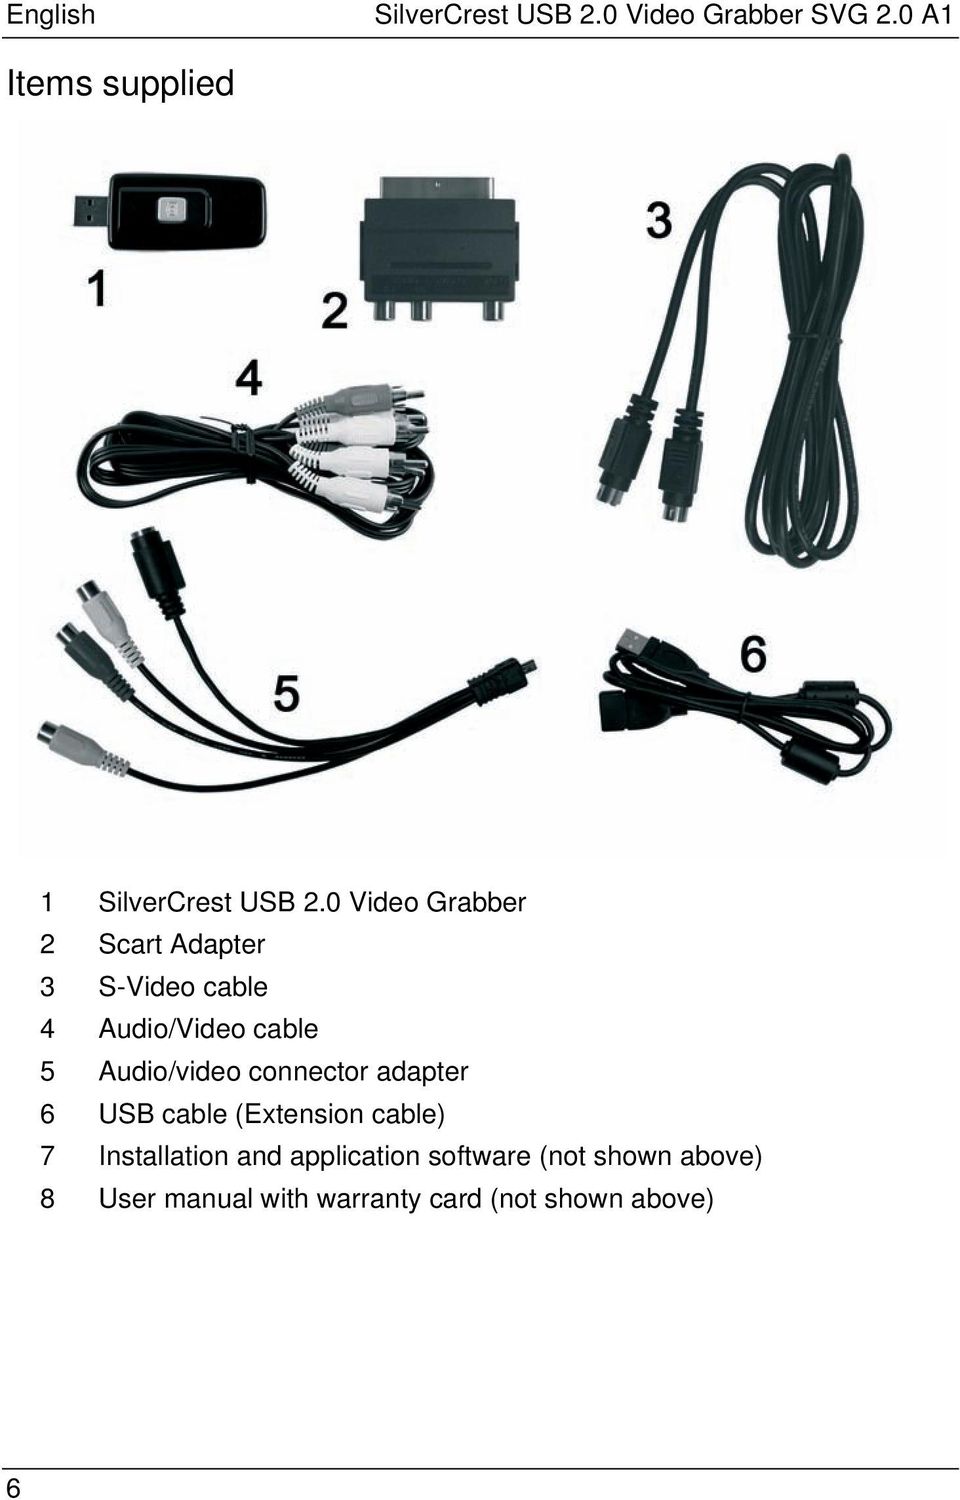 0 Video Grabber 2 Scart Adapter 3 S-Video cable 4 Audio/Video cable 5 Audio/video